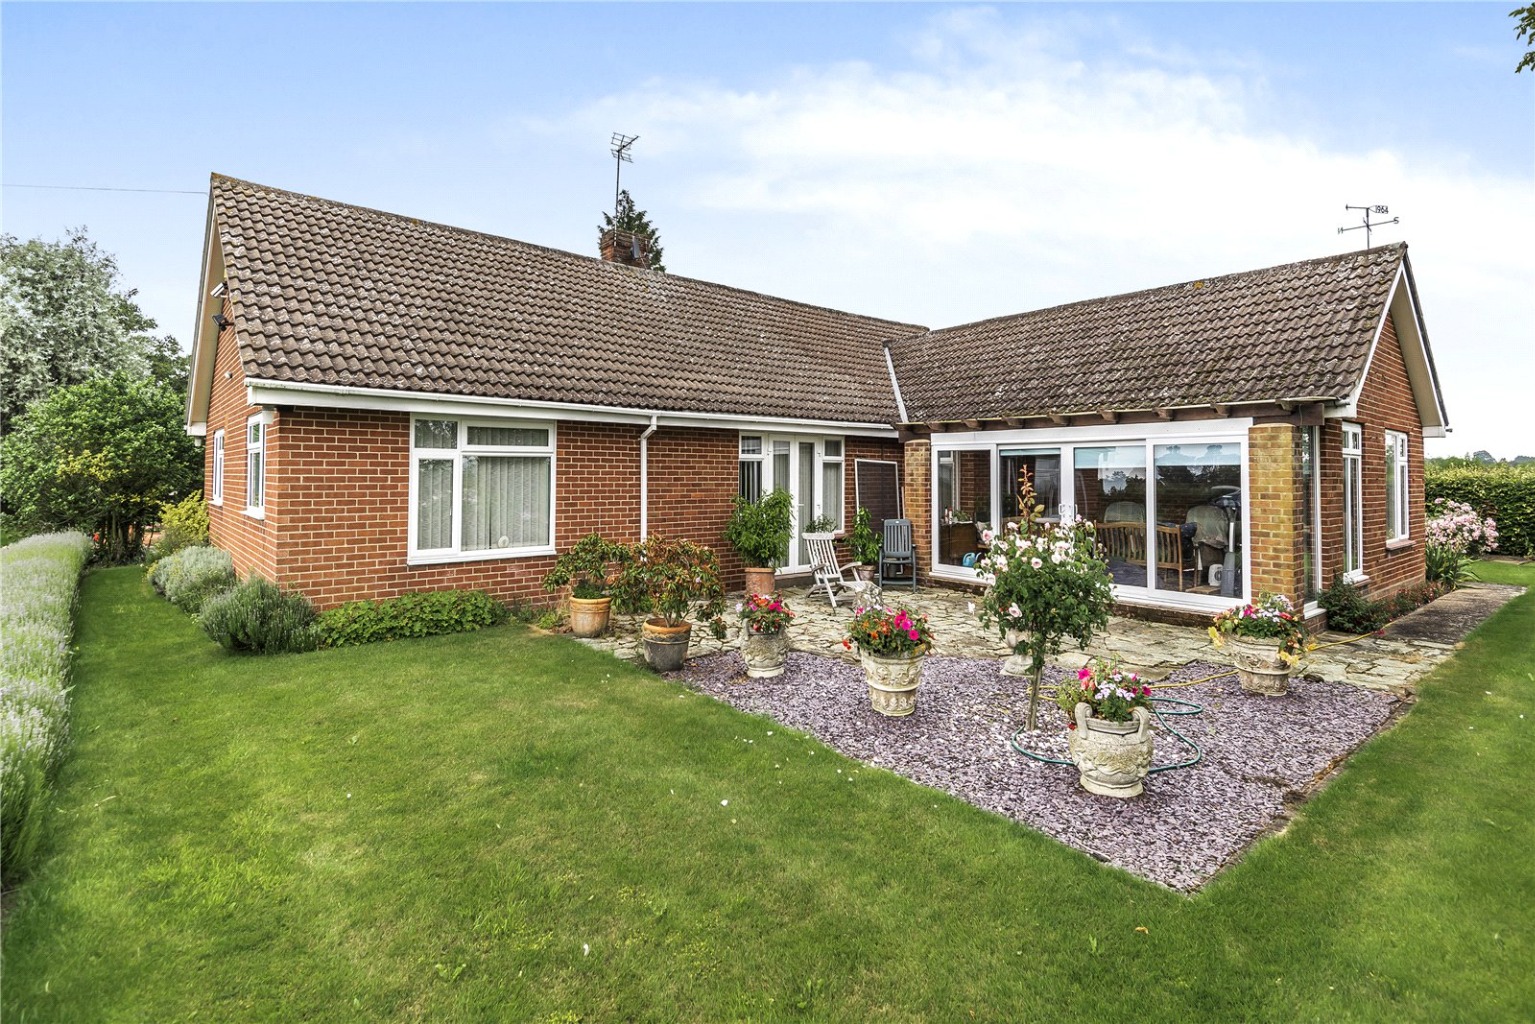 3 bed detached house for sale in Wintringham, St. Neots  - Property Image 4